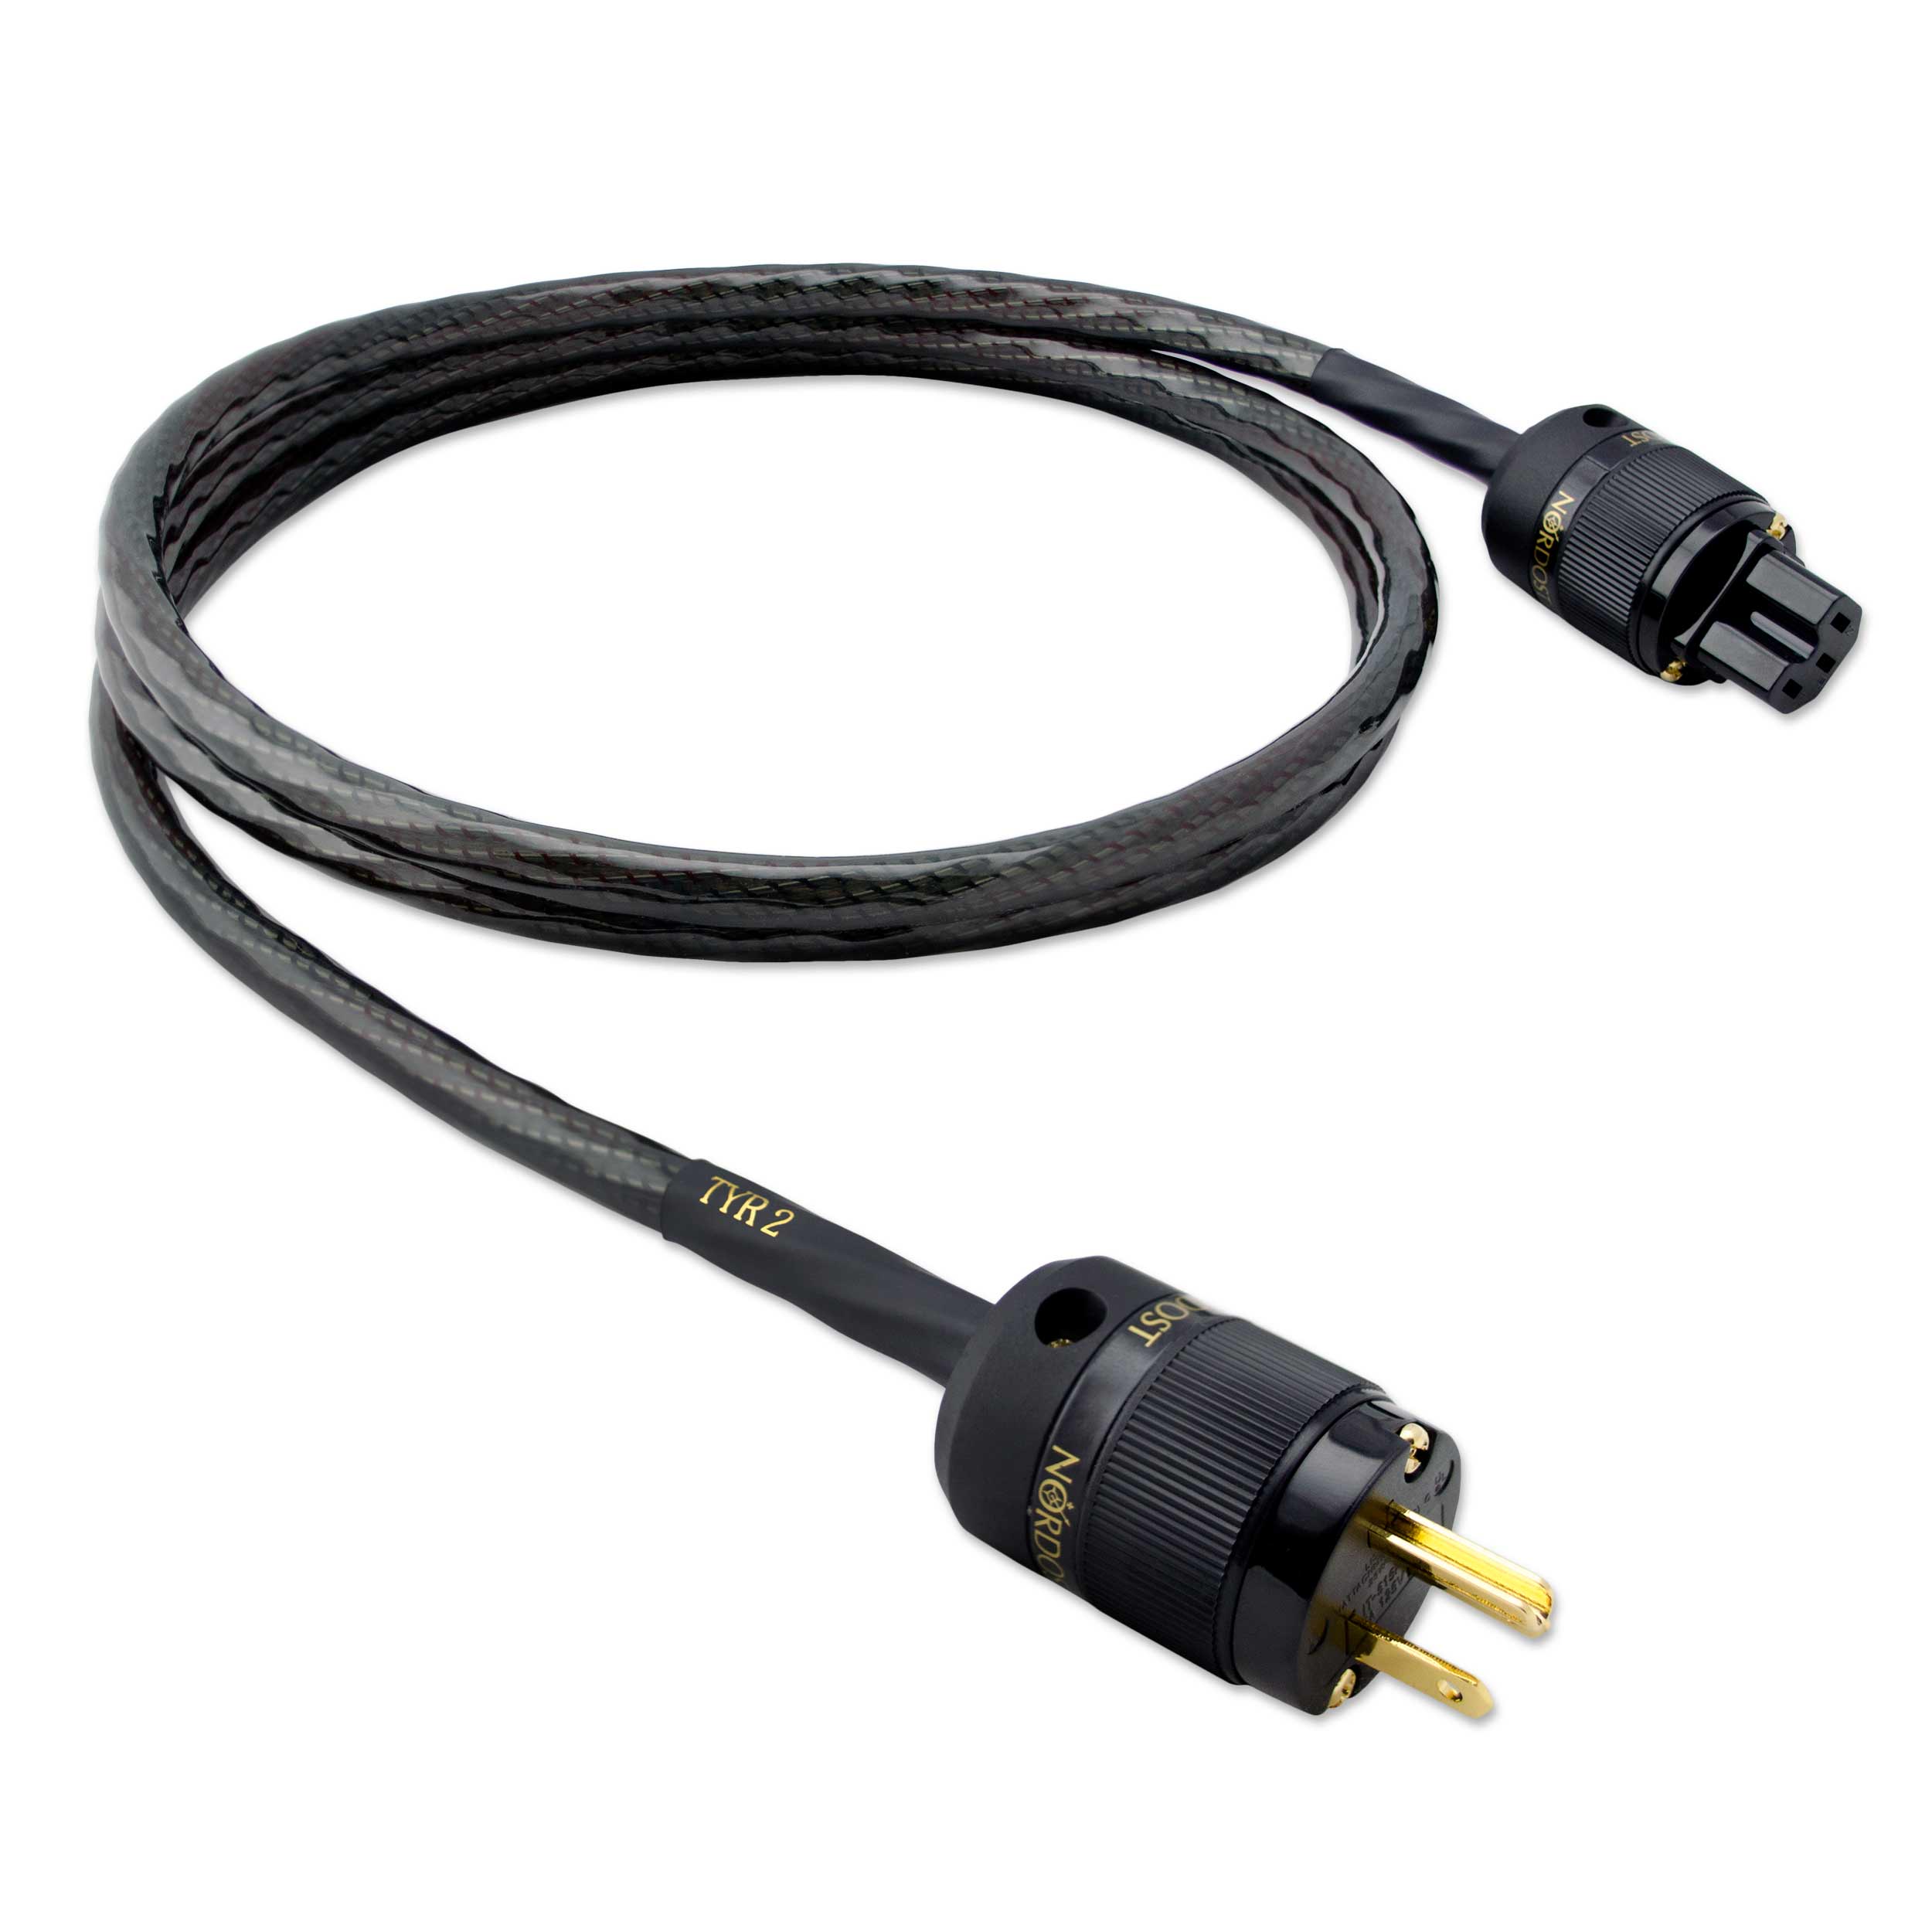 Nordost TYR 2 POWER CORD